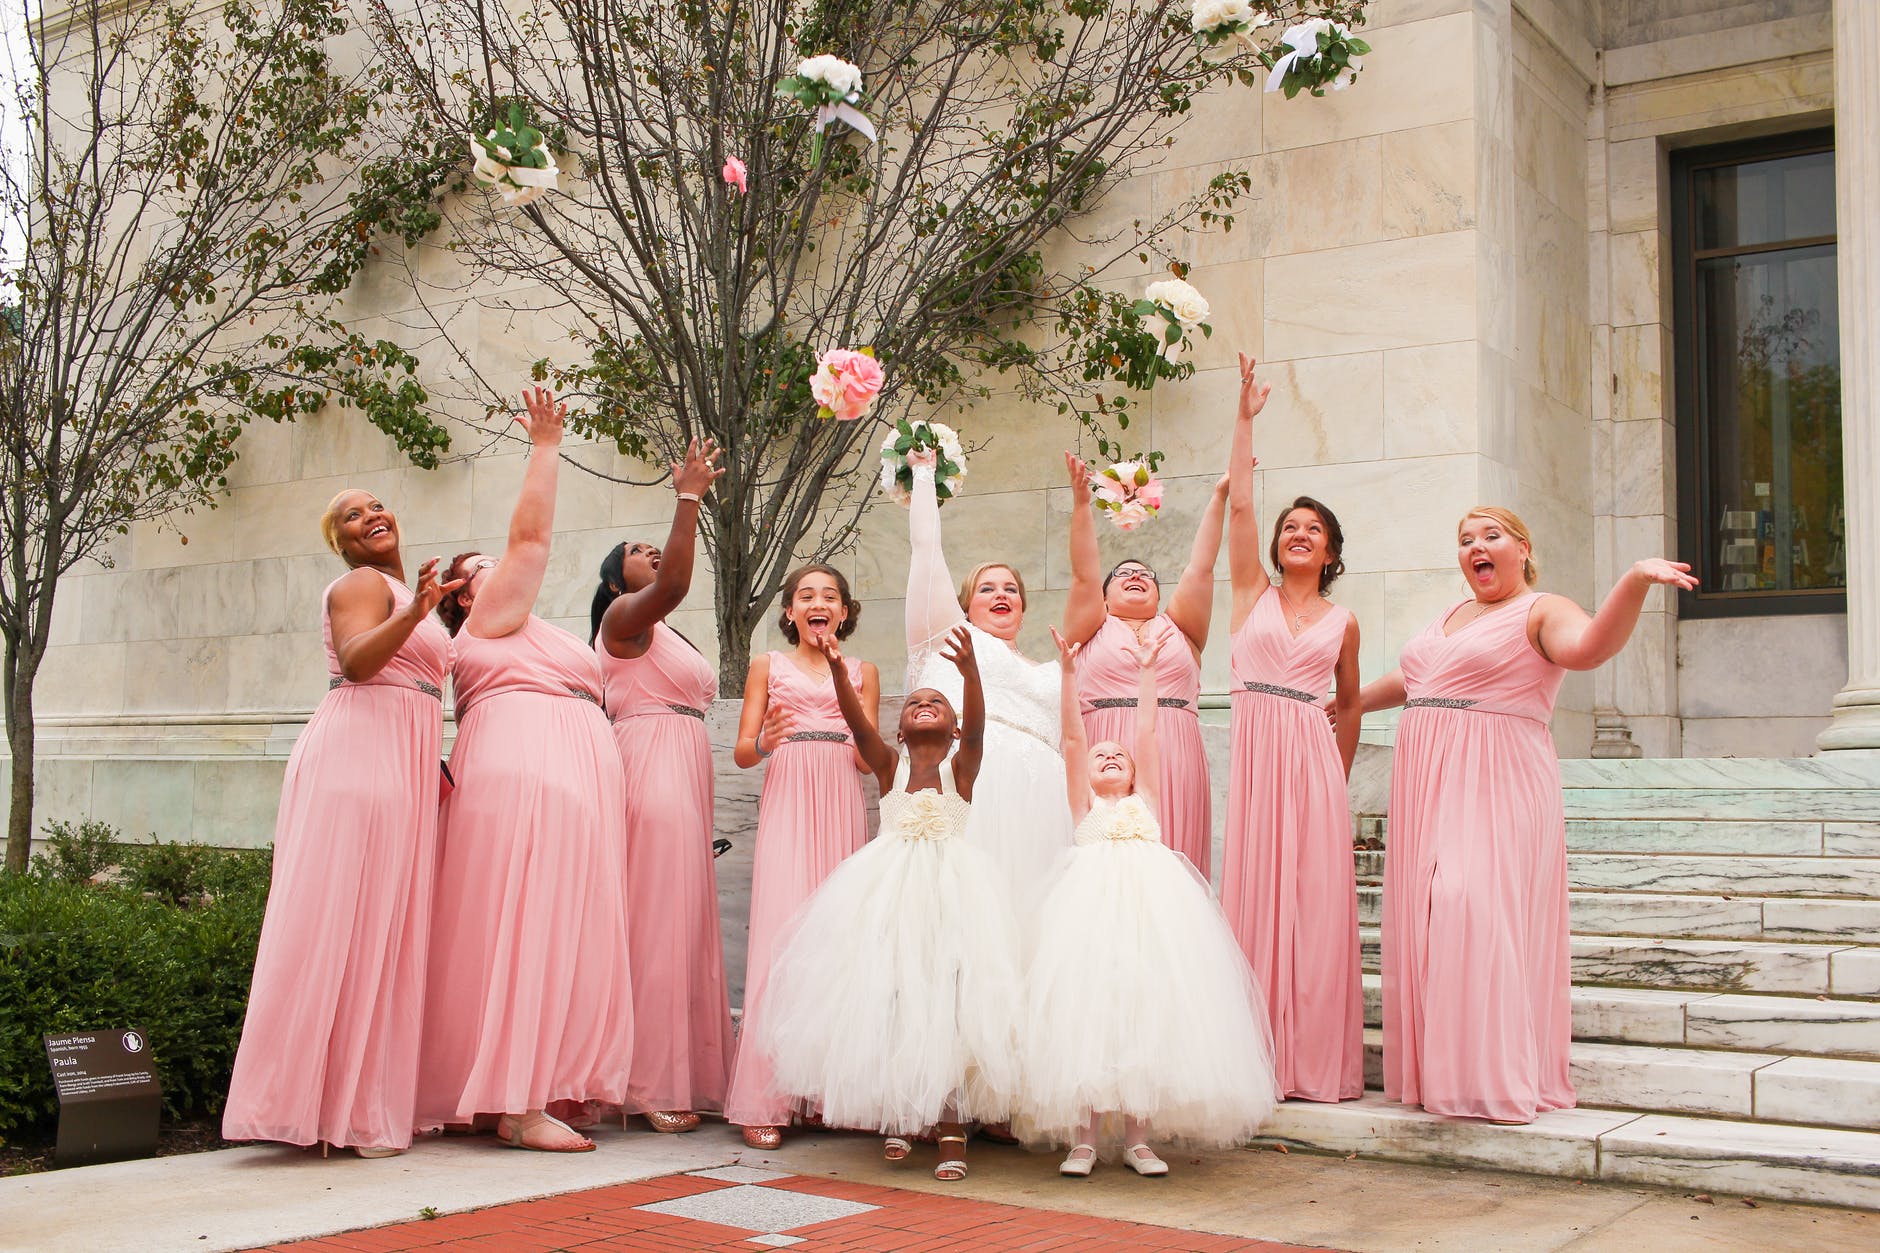 women wearing dresses while throwing bouquets